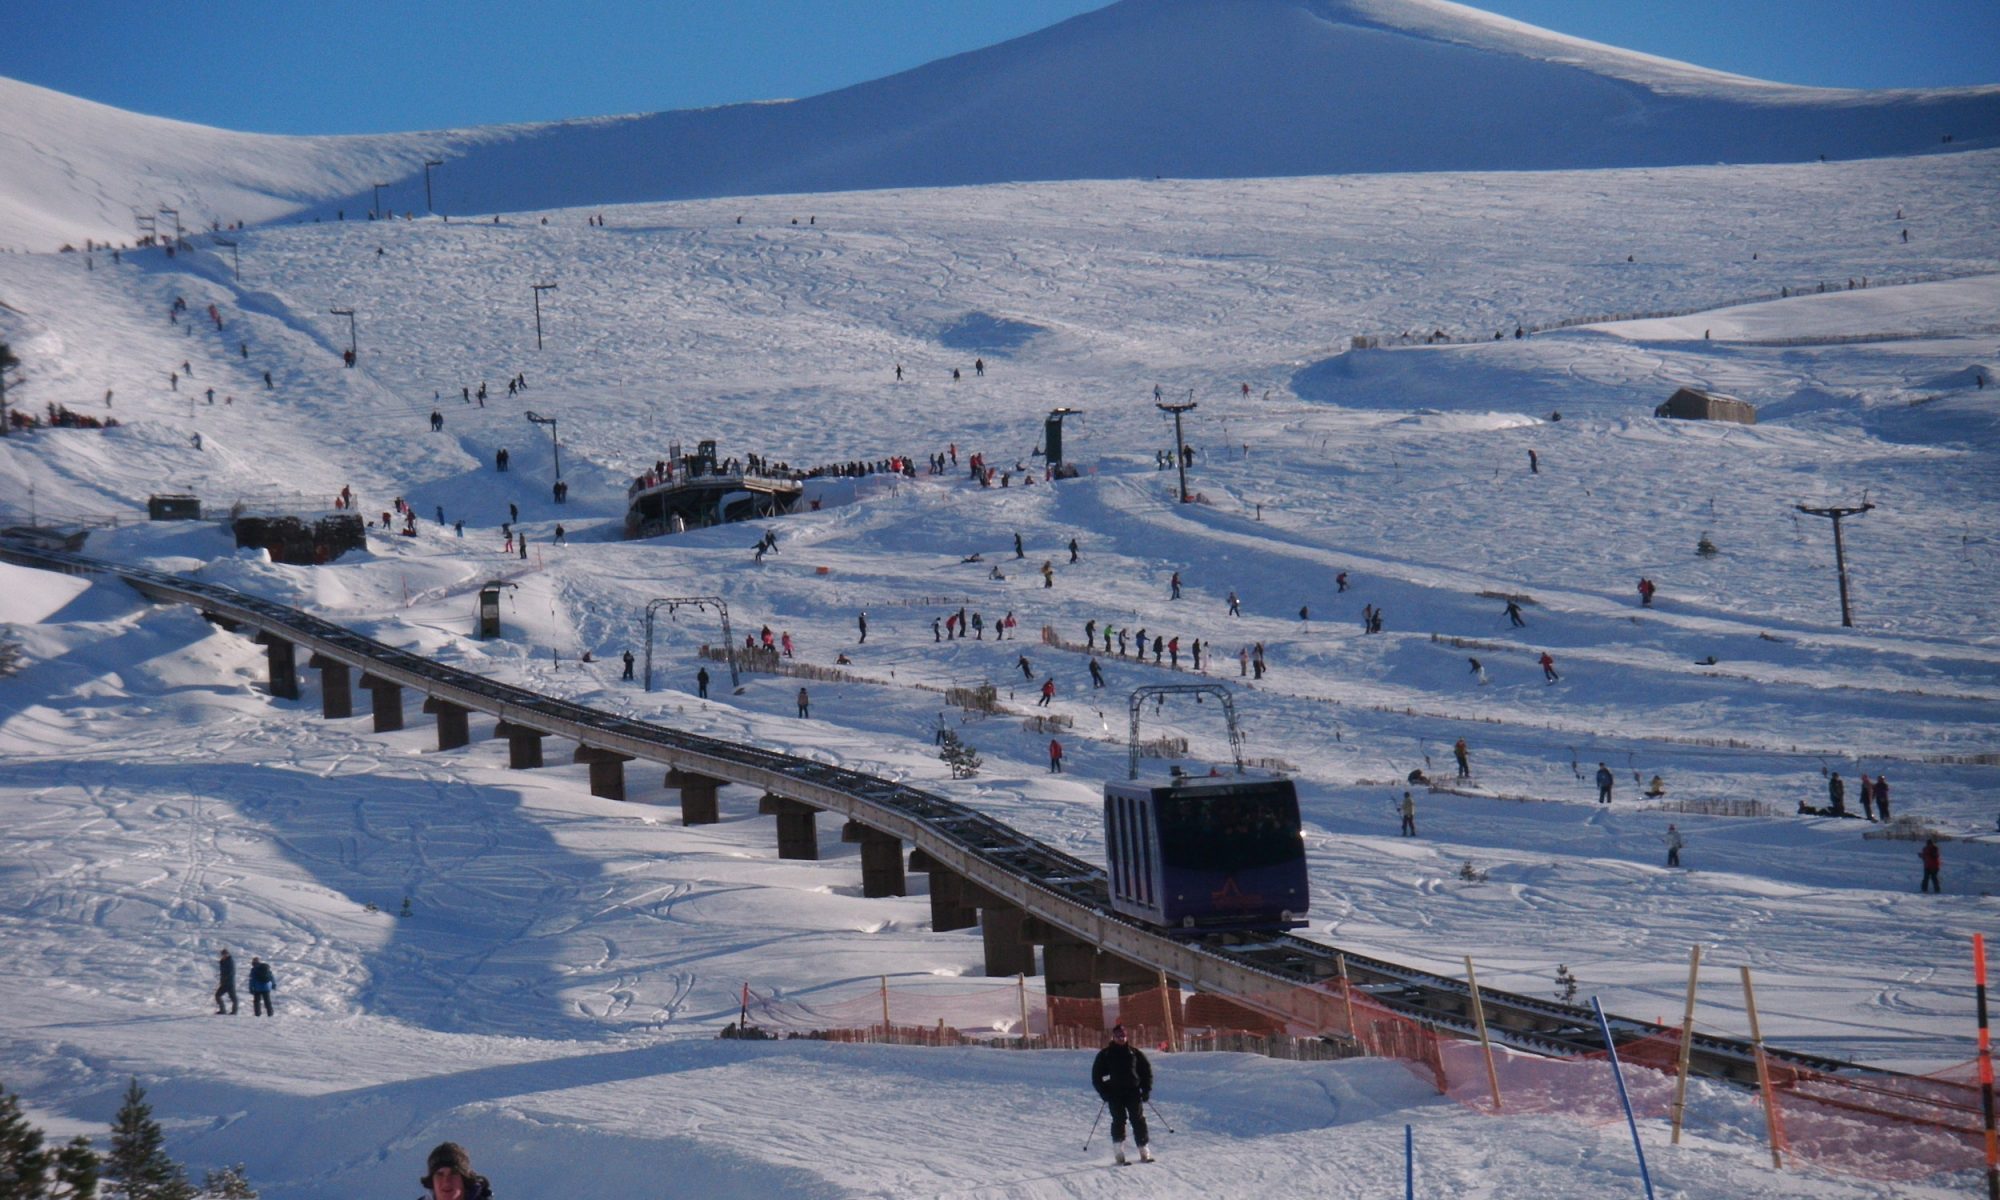 The Cairngorm Mountain's funicular might not open this coming season. Photo: Cairngorm Mountain